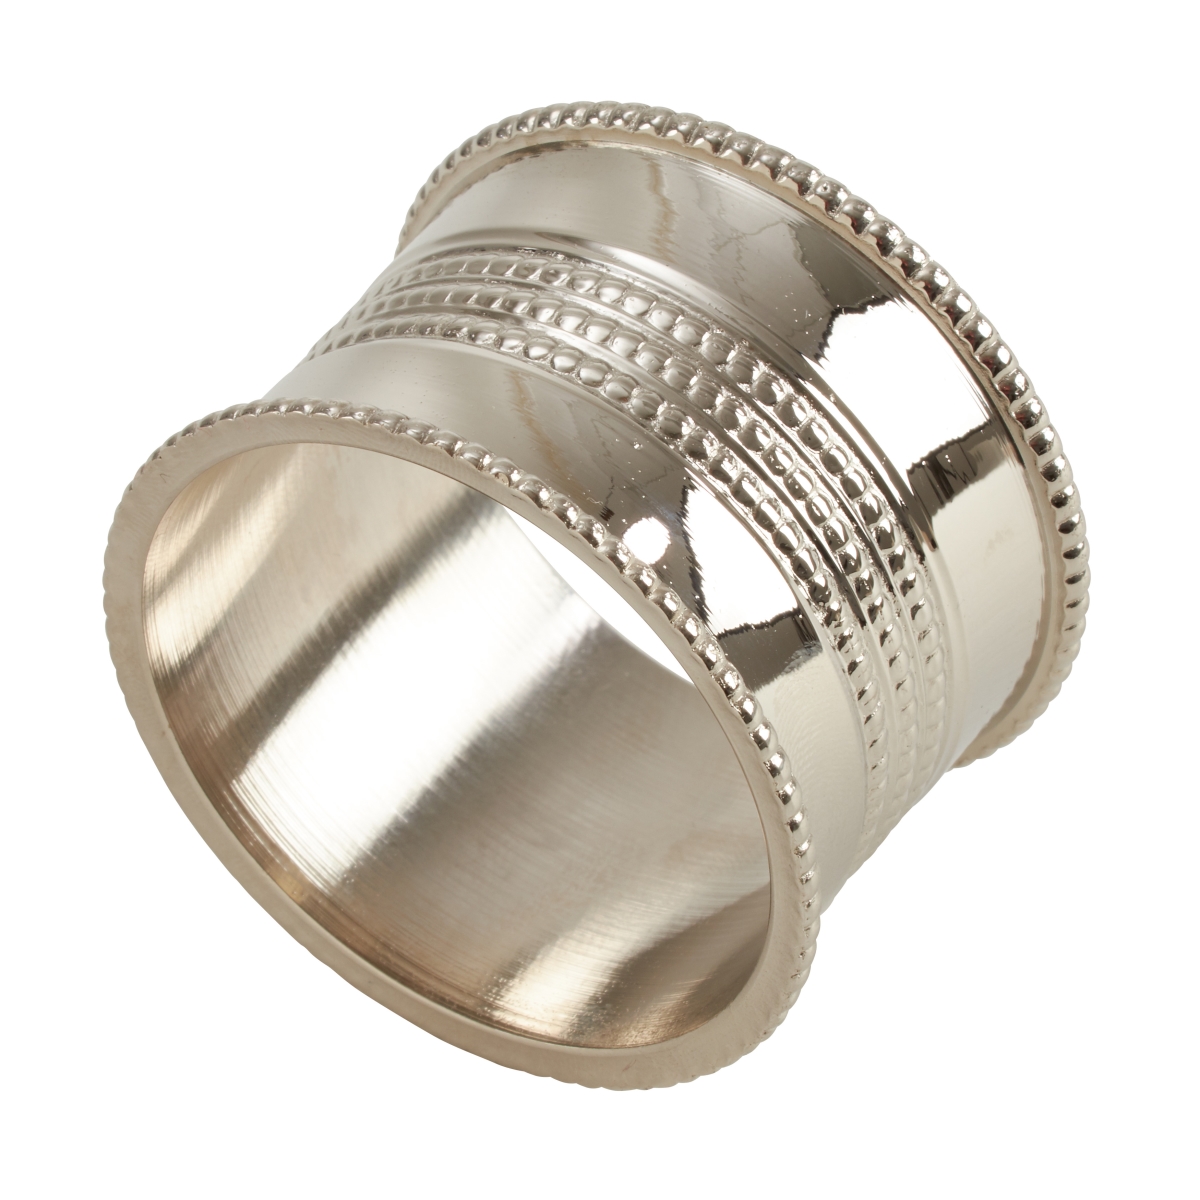 1.75 x 1.25 in. Dotted Design Napkin Rings, Silver - Set of 4 -  CookHouse, CO3197680